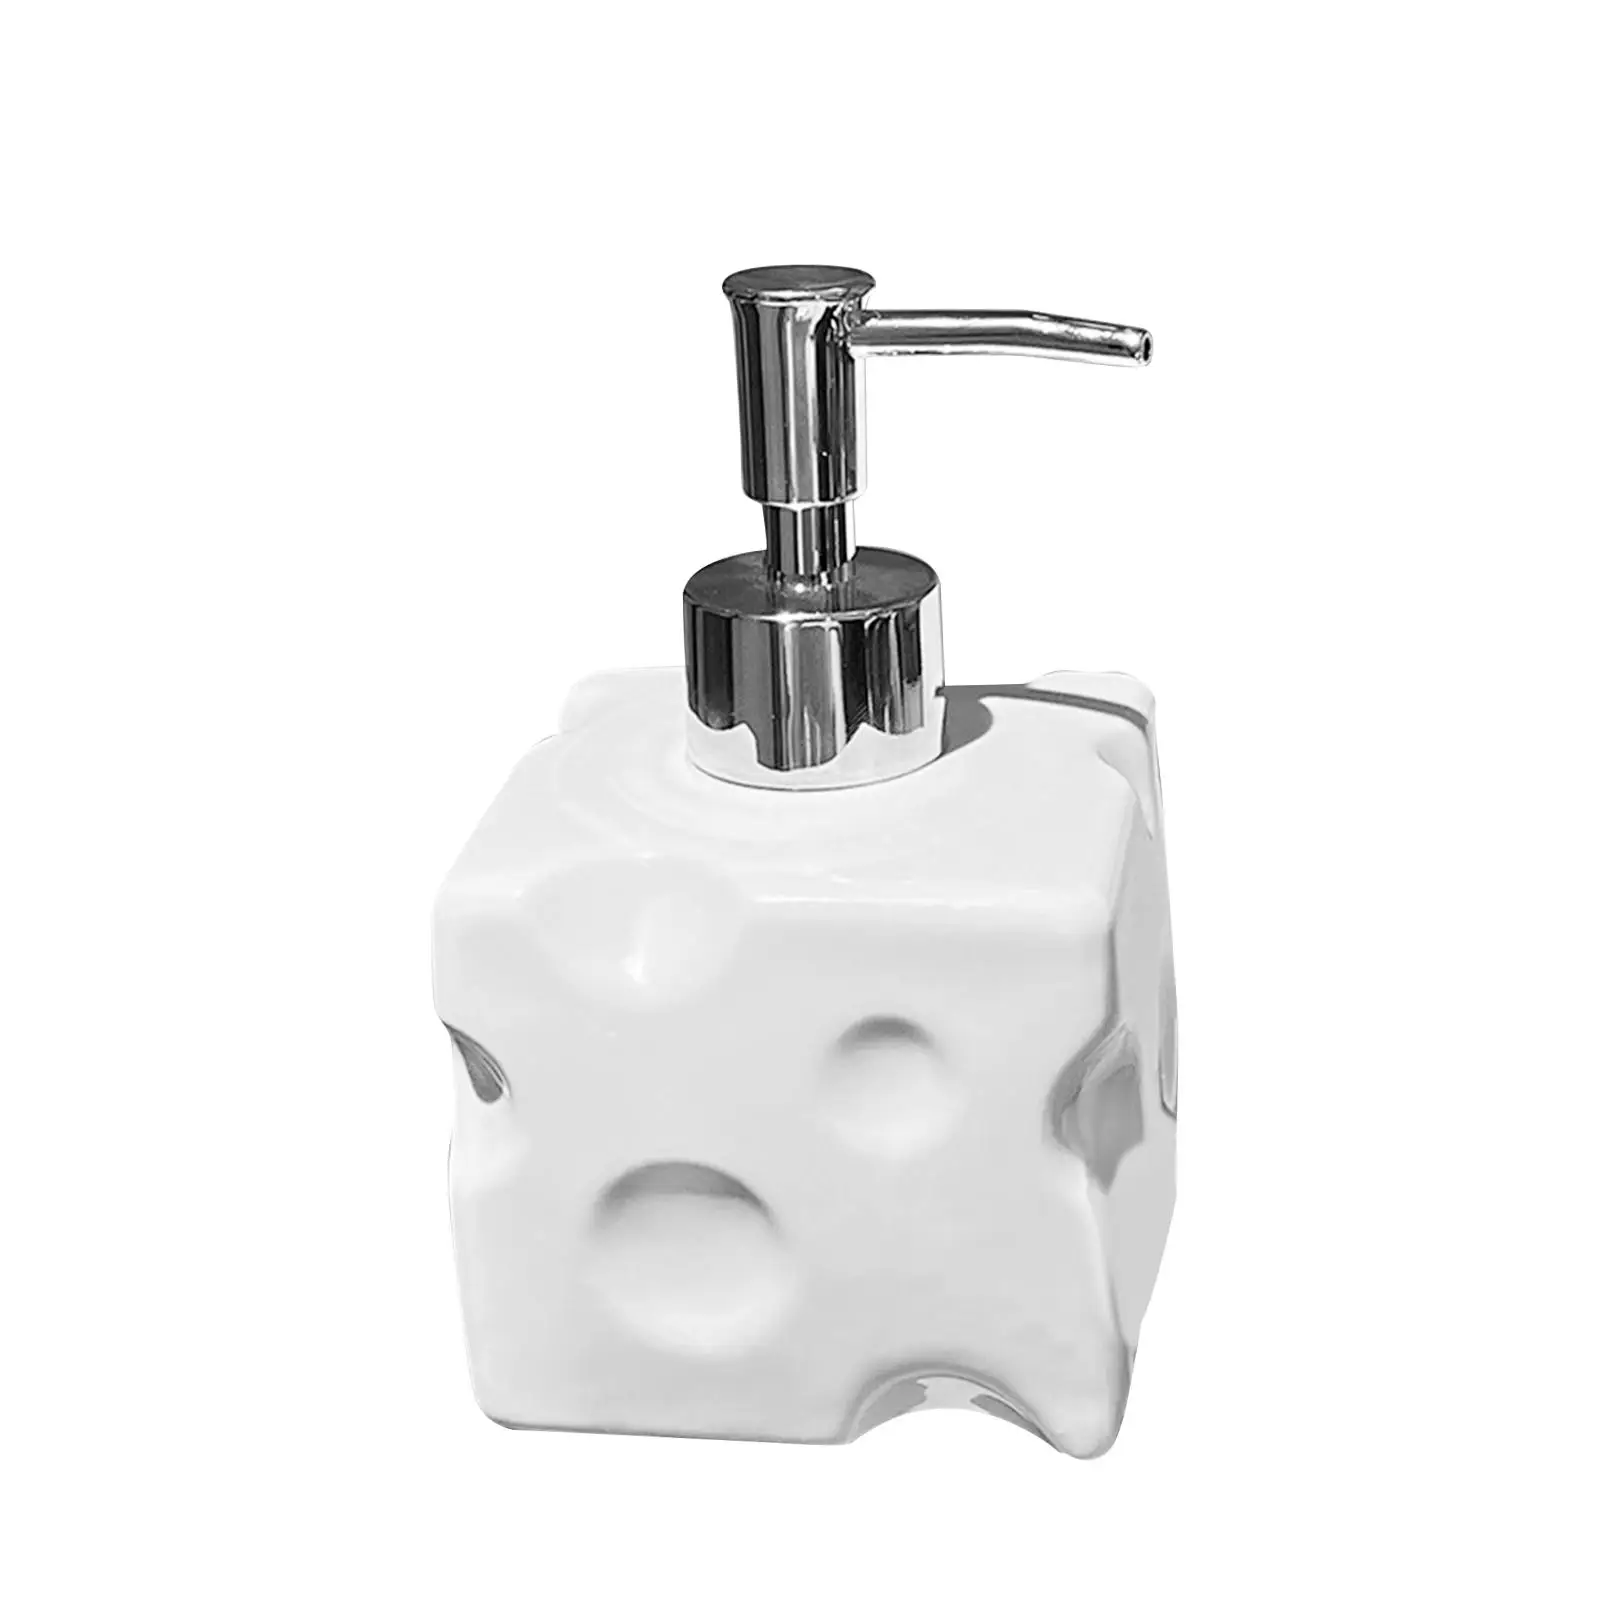 Manual Soap Dispenser Pump Soap Container for Kitchen Laundry Room